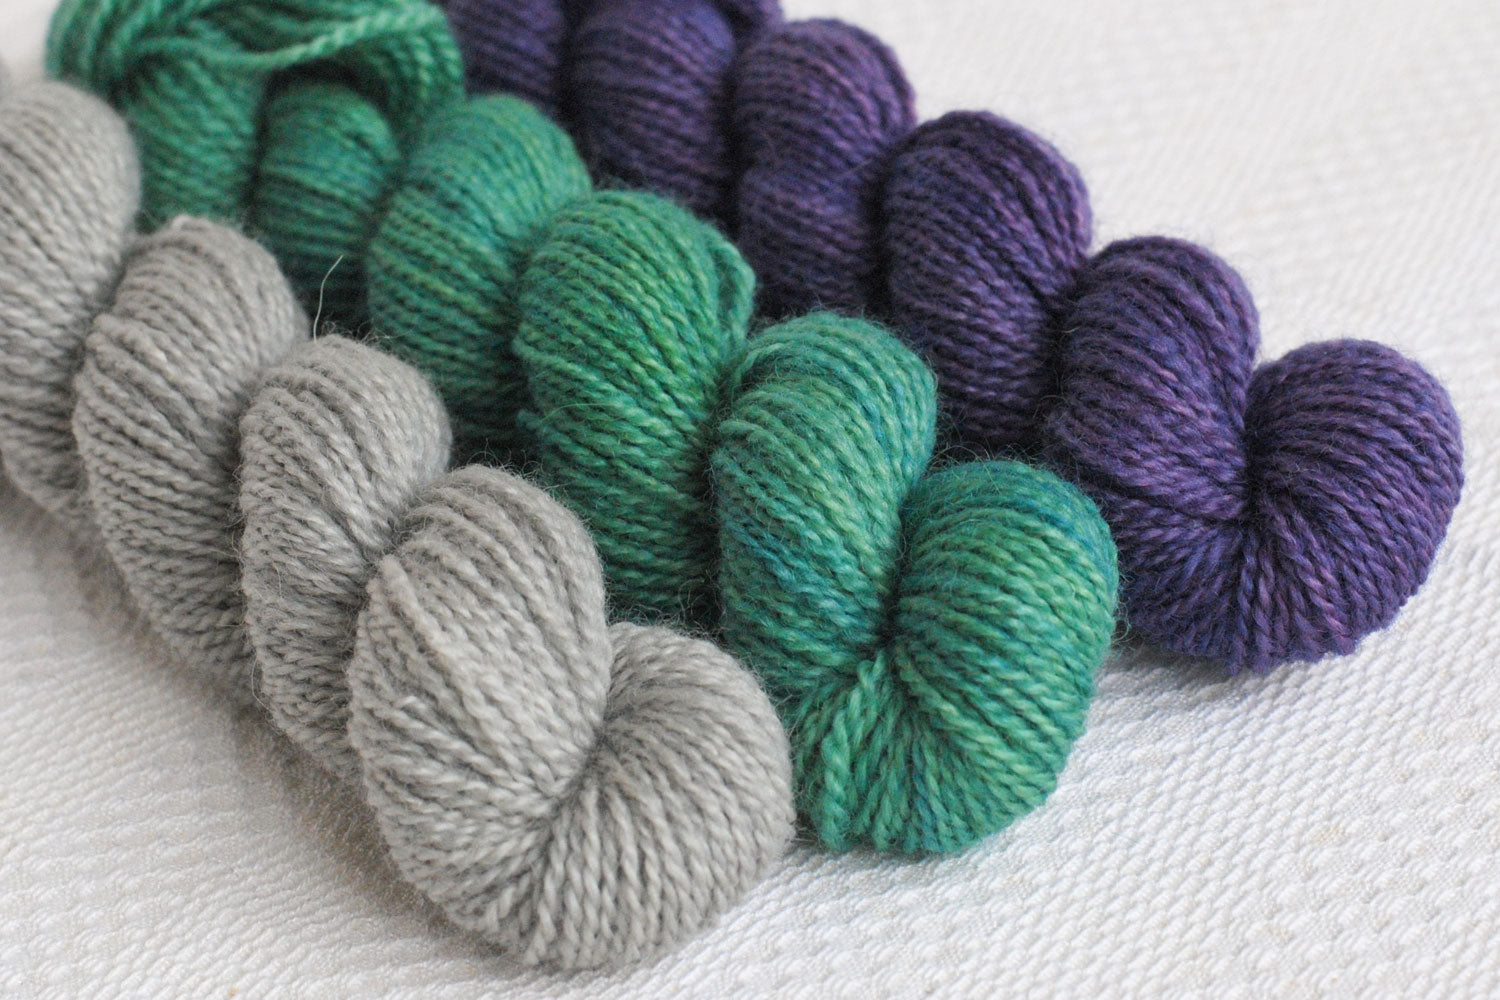 Set of three hand-dyed mini-skeins in grey, teal, and purple